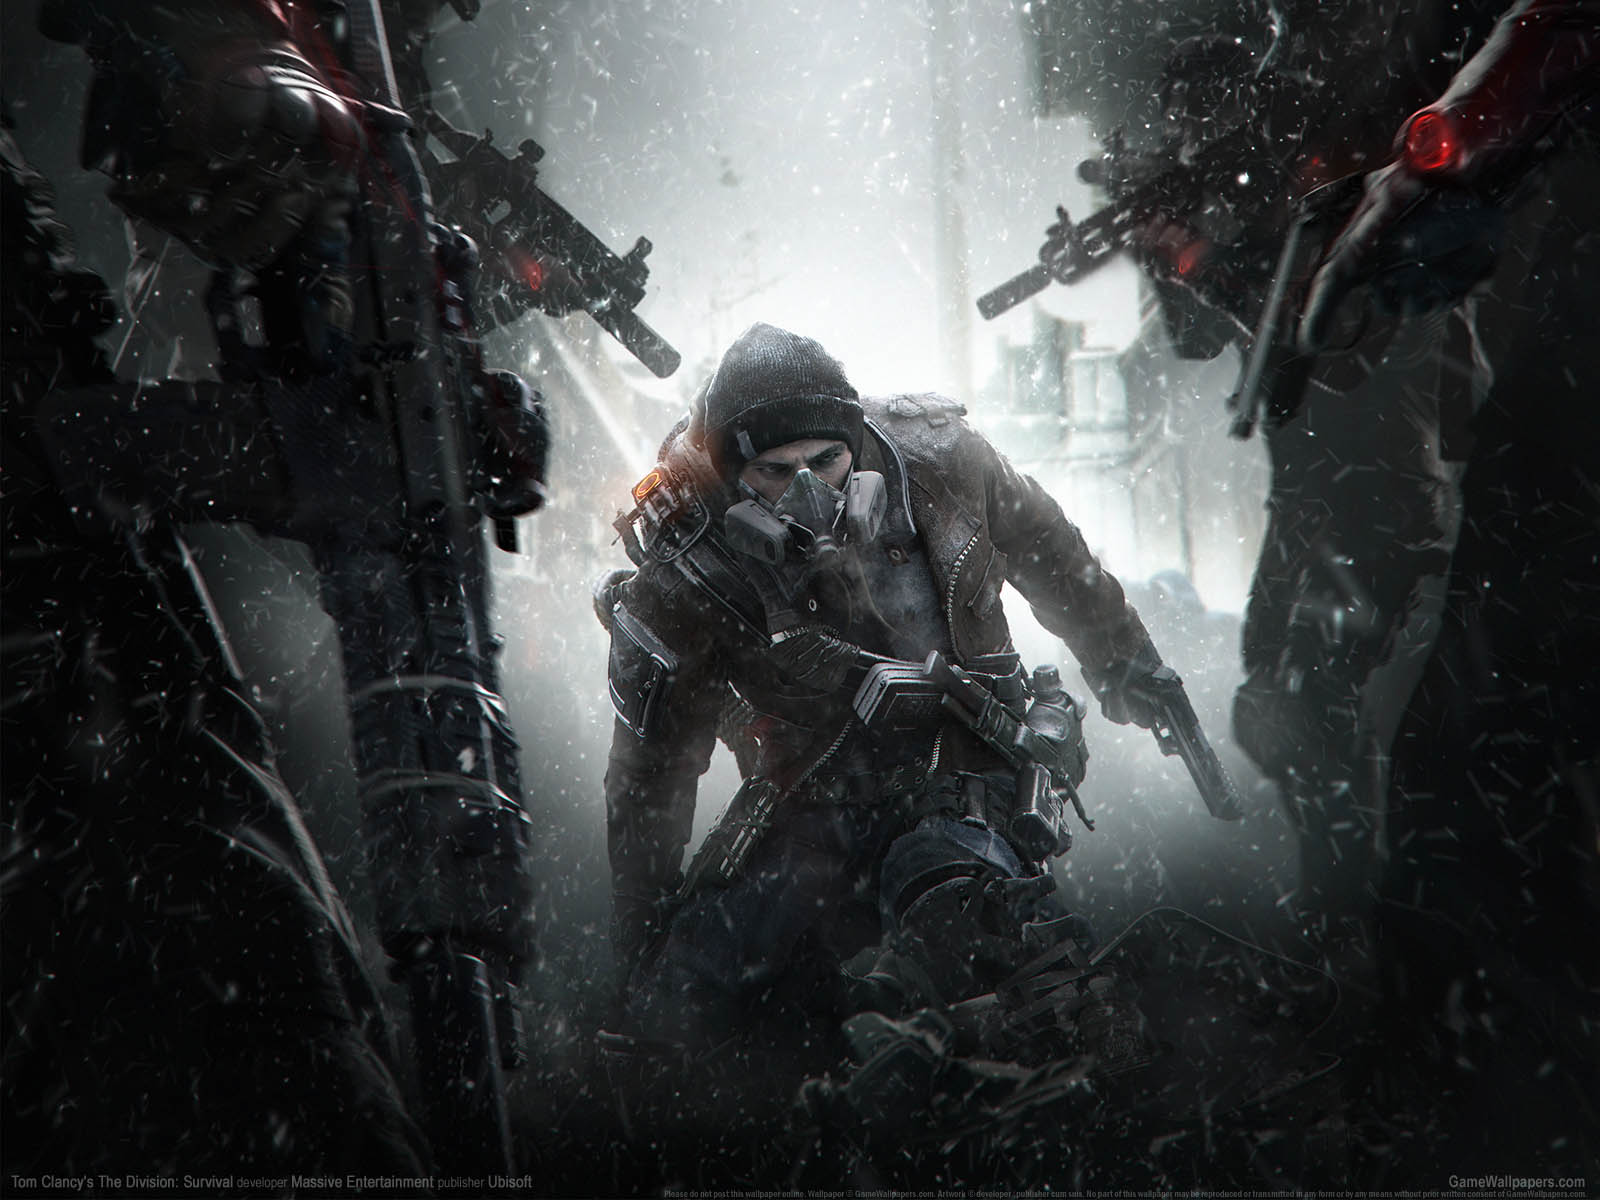 Tom Clancy's The Division: Survivalνmmer=01 wallpaper  1600x1200